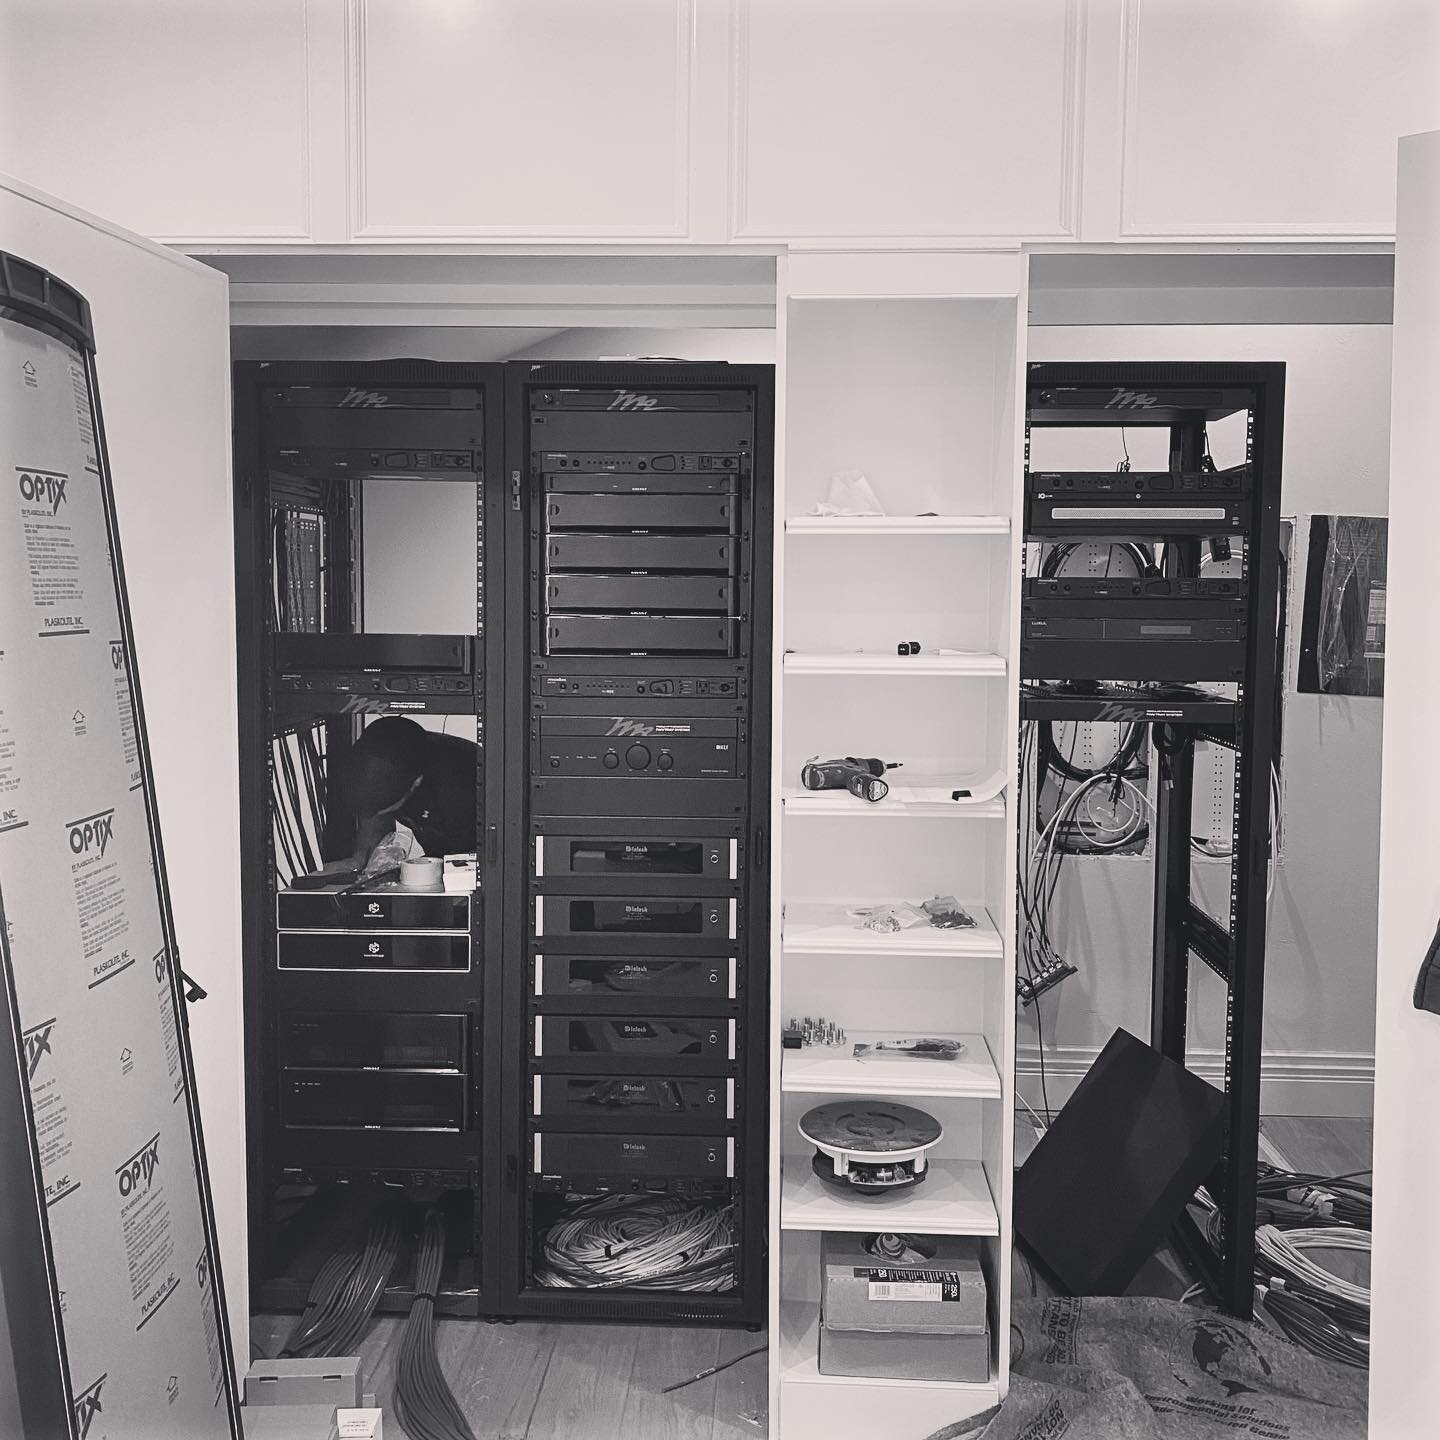 This home was a major remodel, and the owners provided the A/V equipment a premium space: a very large closet hidden away behind custom built-ins.&thinsp;
We began this project in the blissful month of February 2020&hellip;then COVID put this project